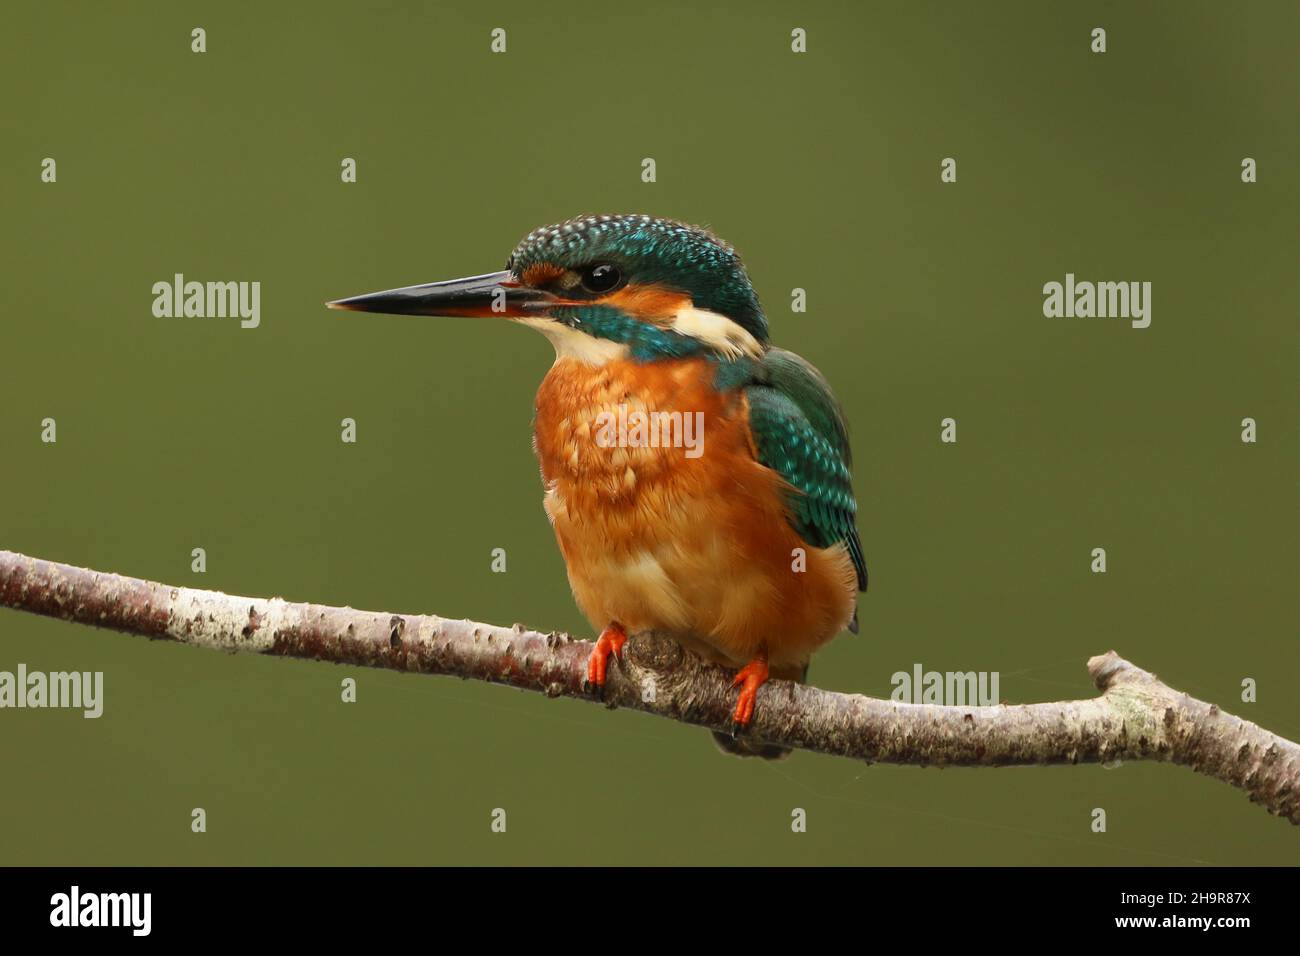 Kingfisher, unmistakable when seen perched, or as a blue streak in flight. Catches its food by diving into water returning to a perch to stun then eat. Stock Photo